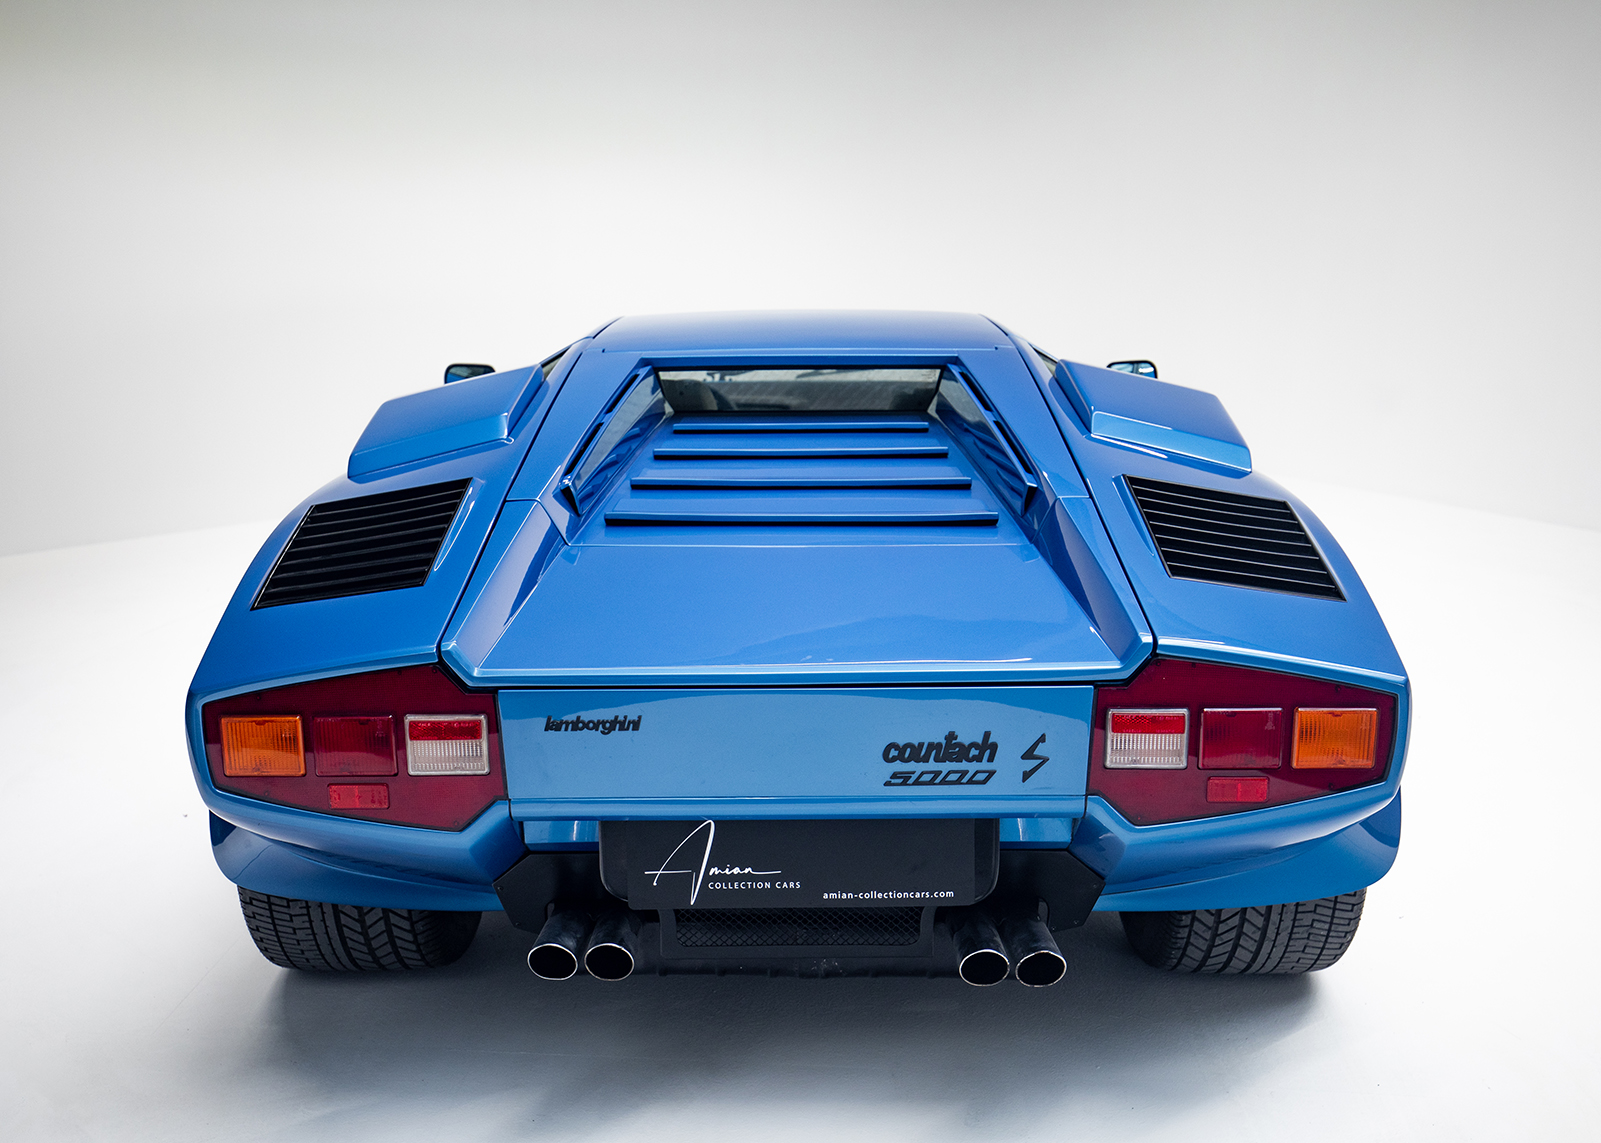 https://amian-collectioncars.com/wp-content/uploads/2022/07/220622_Countach-1.jpg